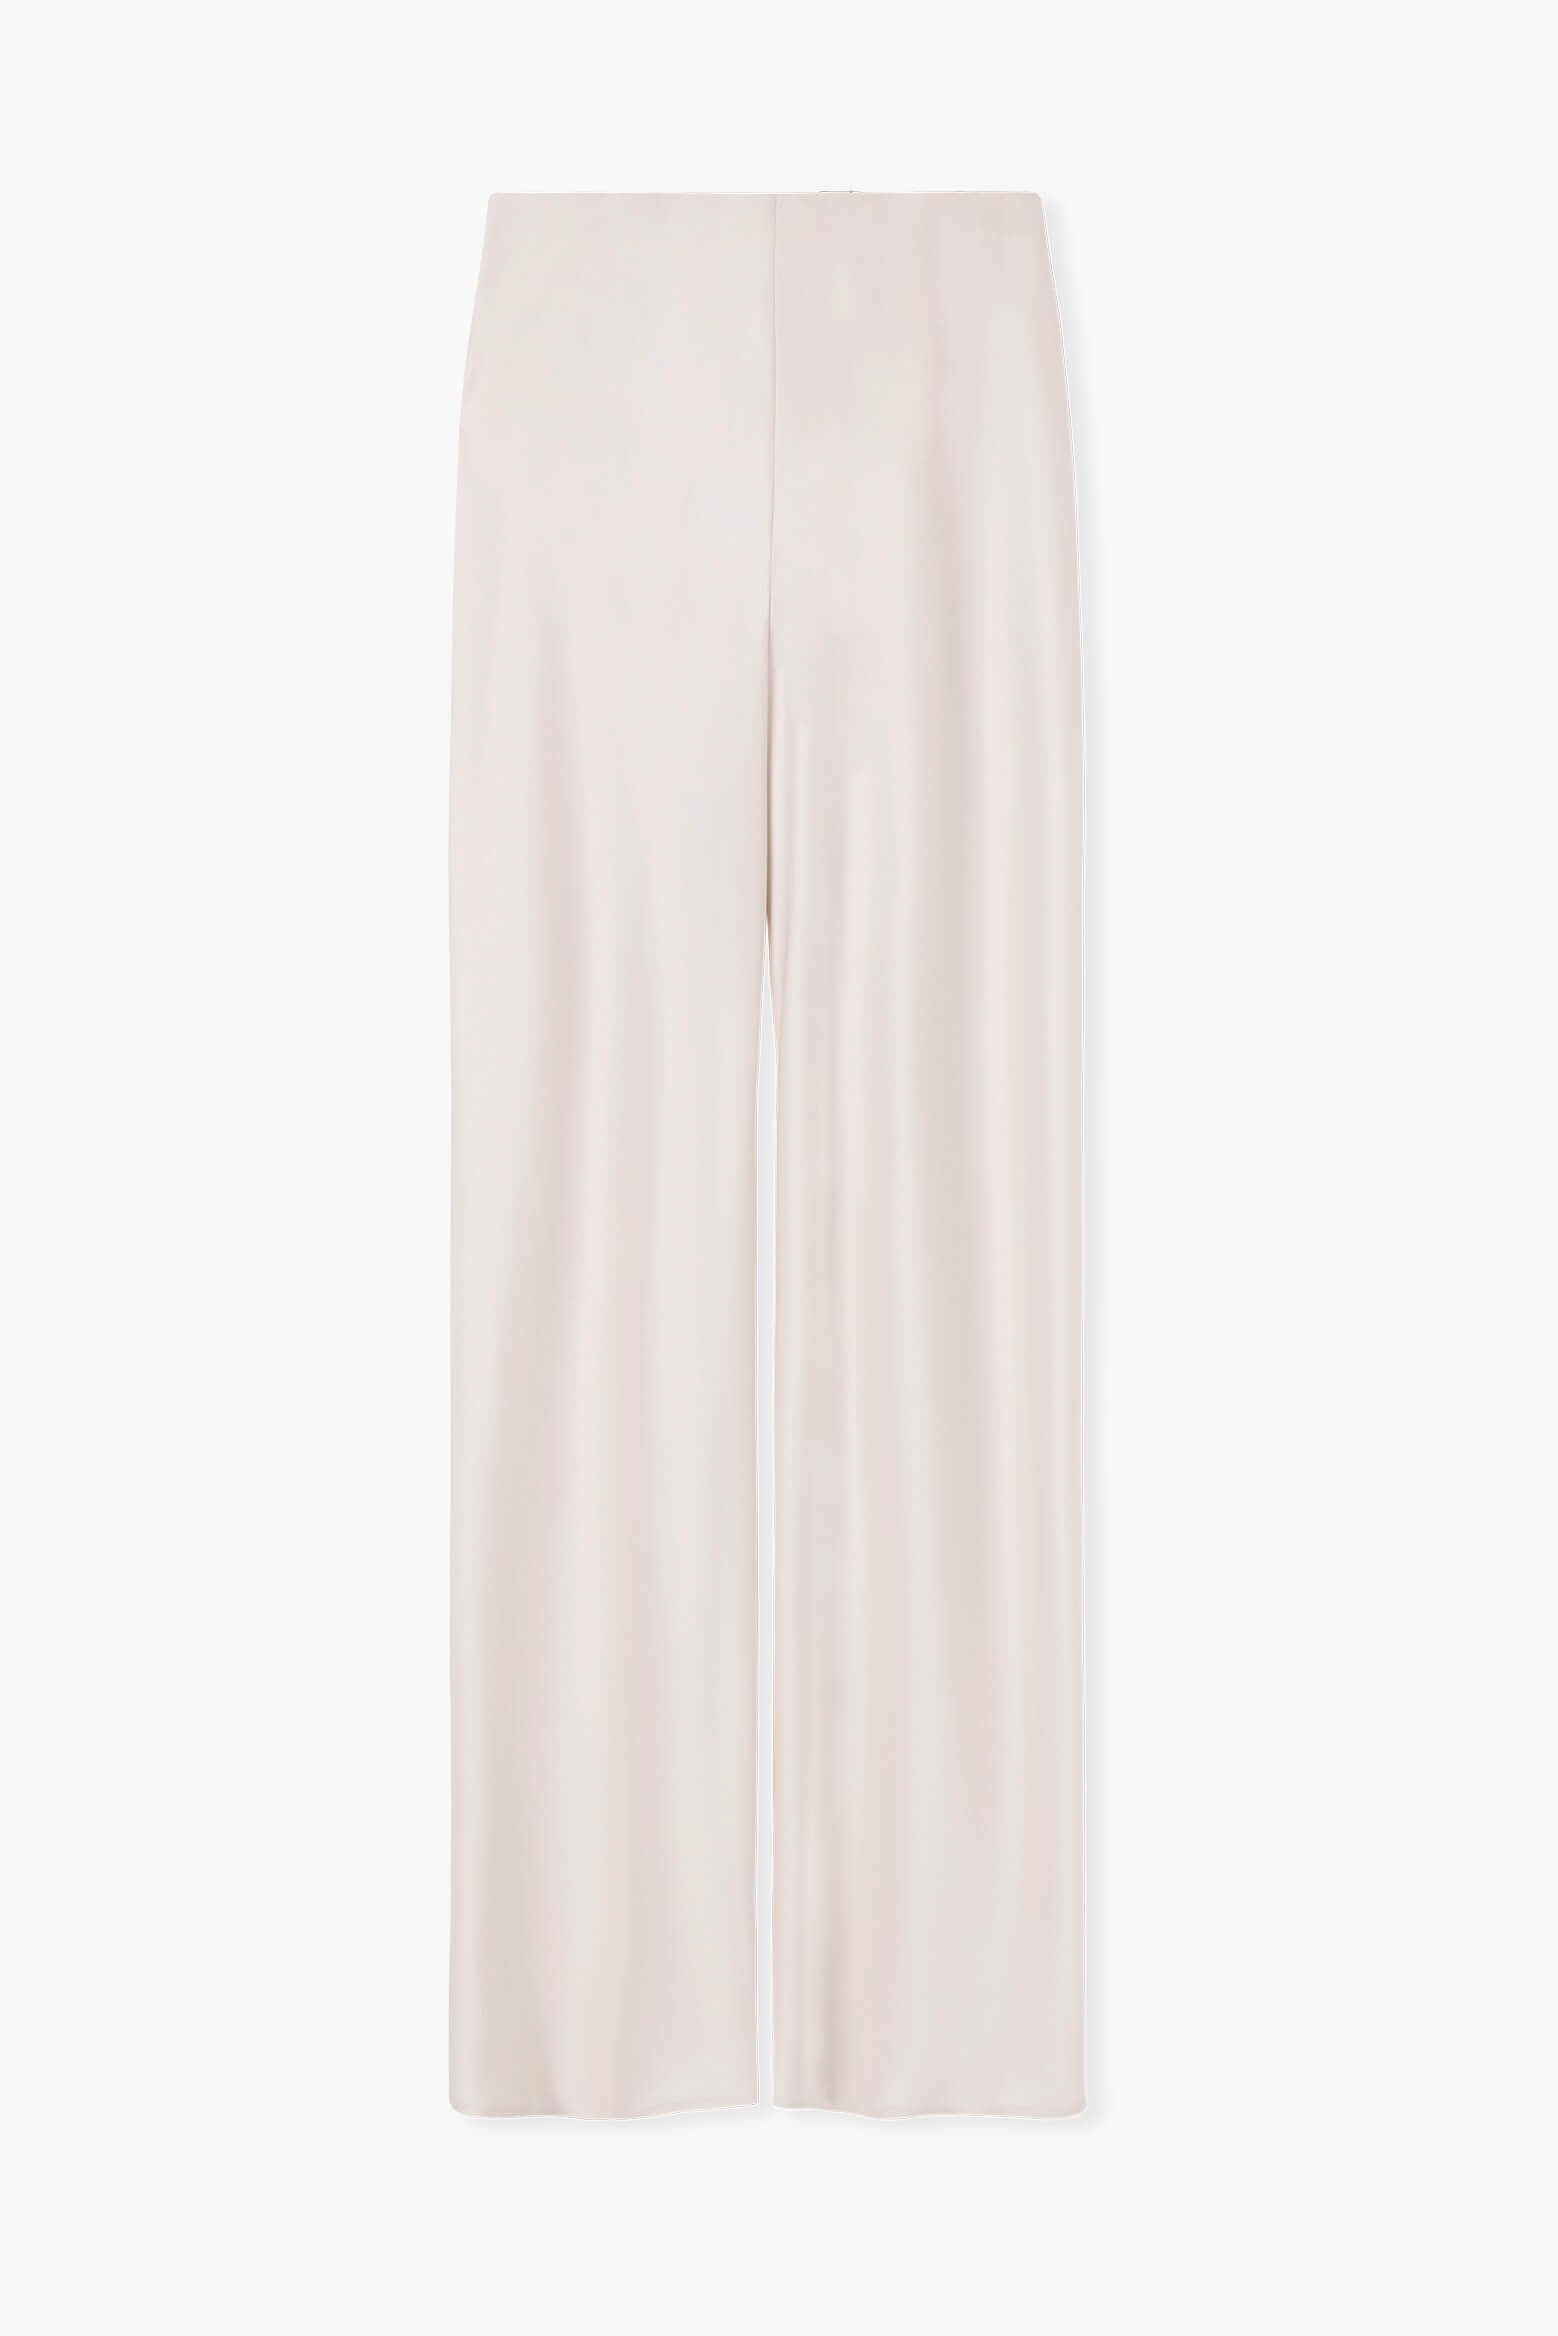 A.Emery Myrna Pant in Oyster available at The New Trend Australia.